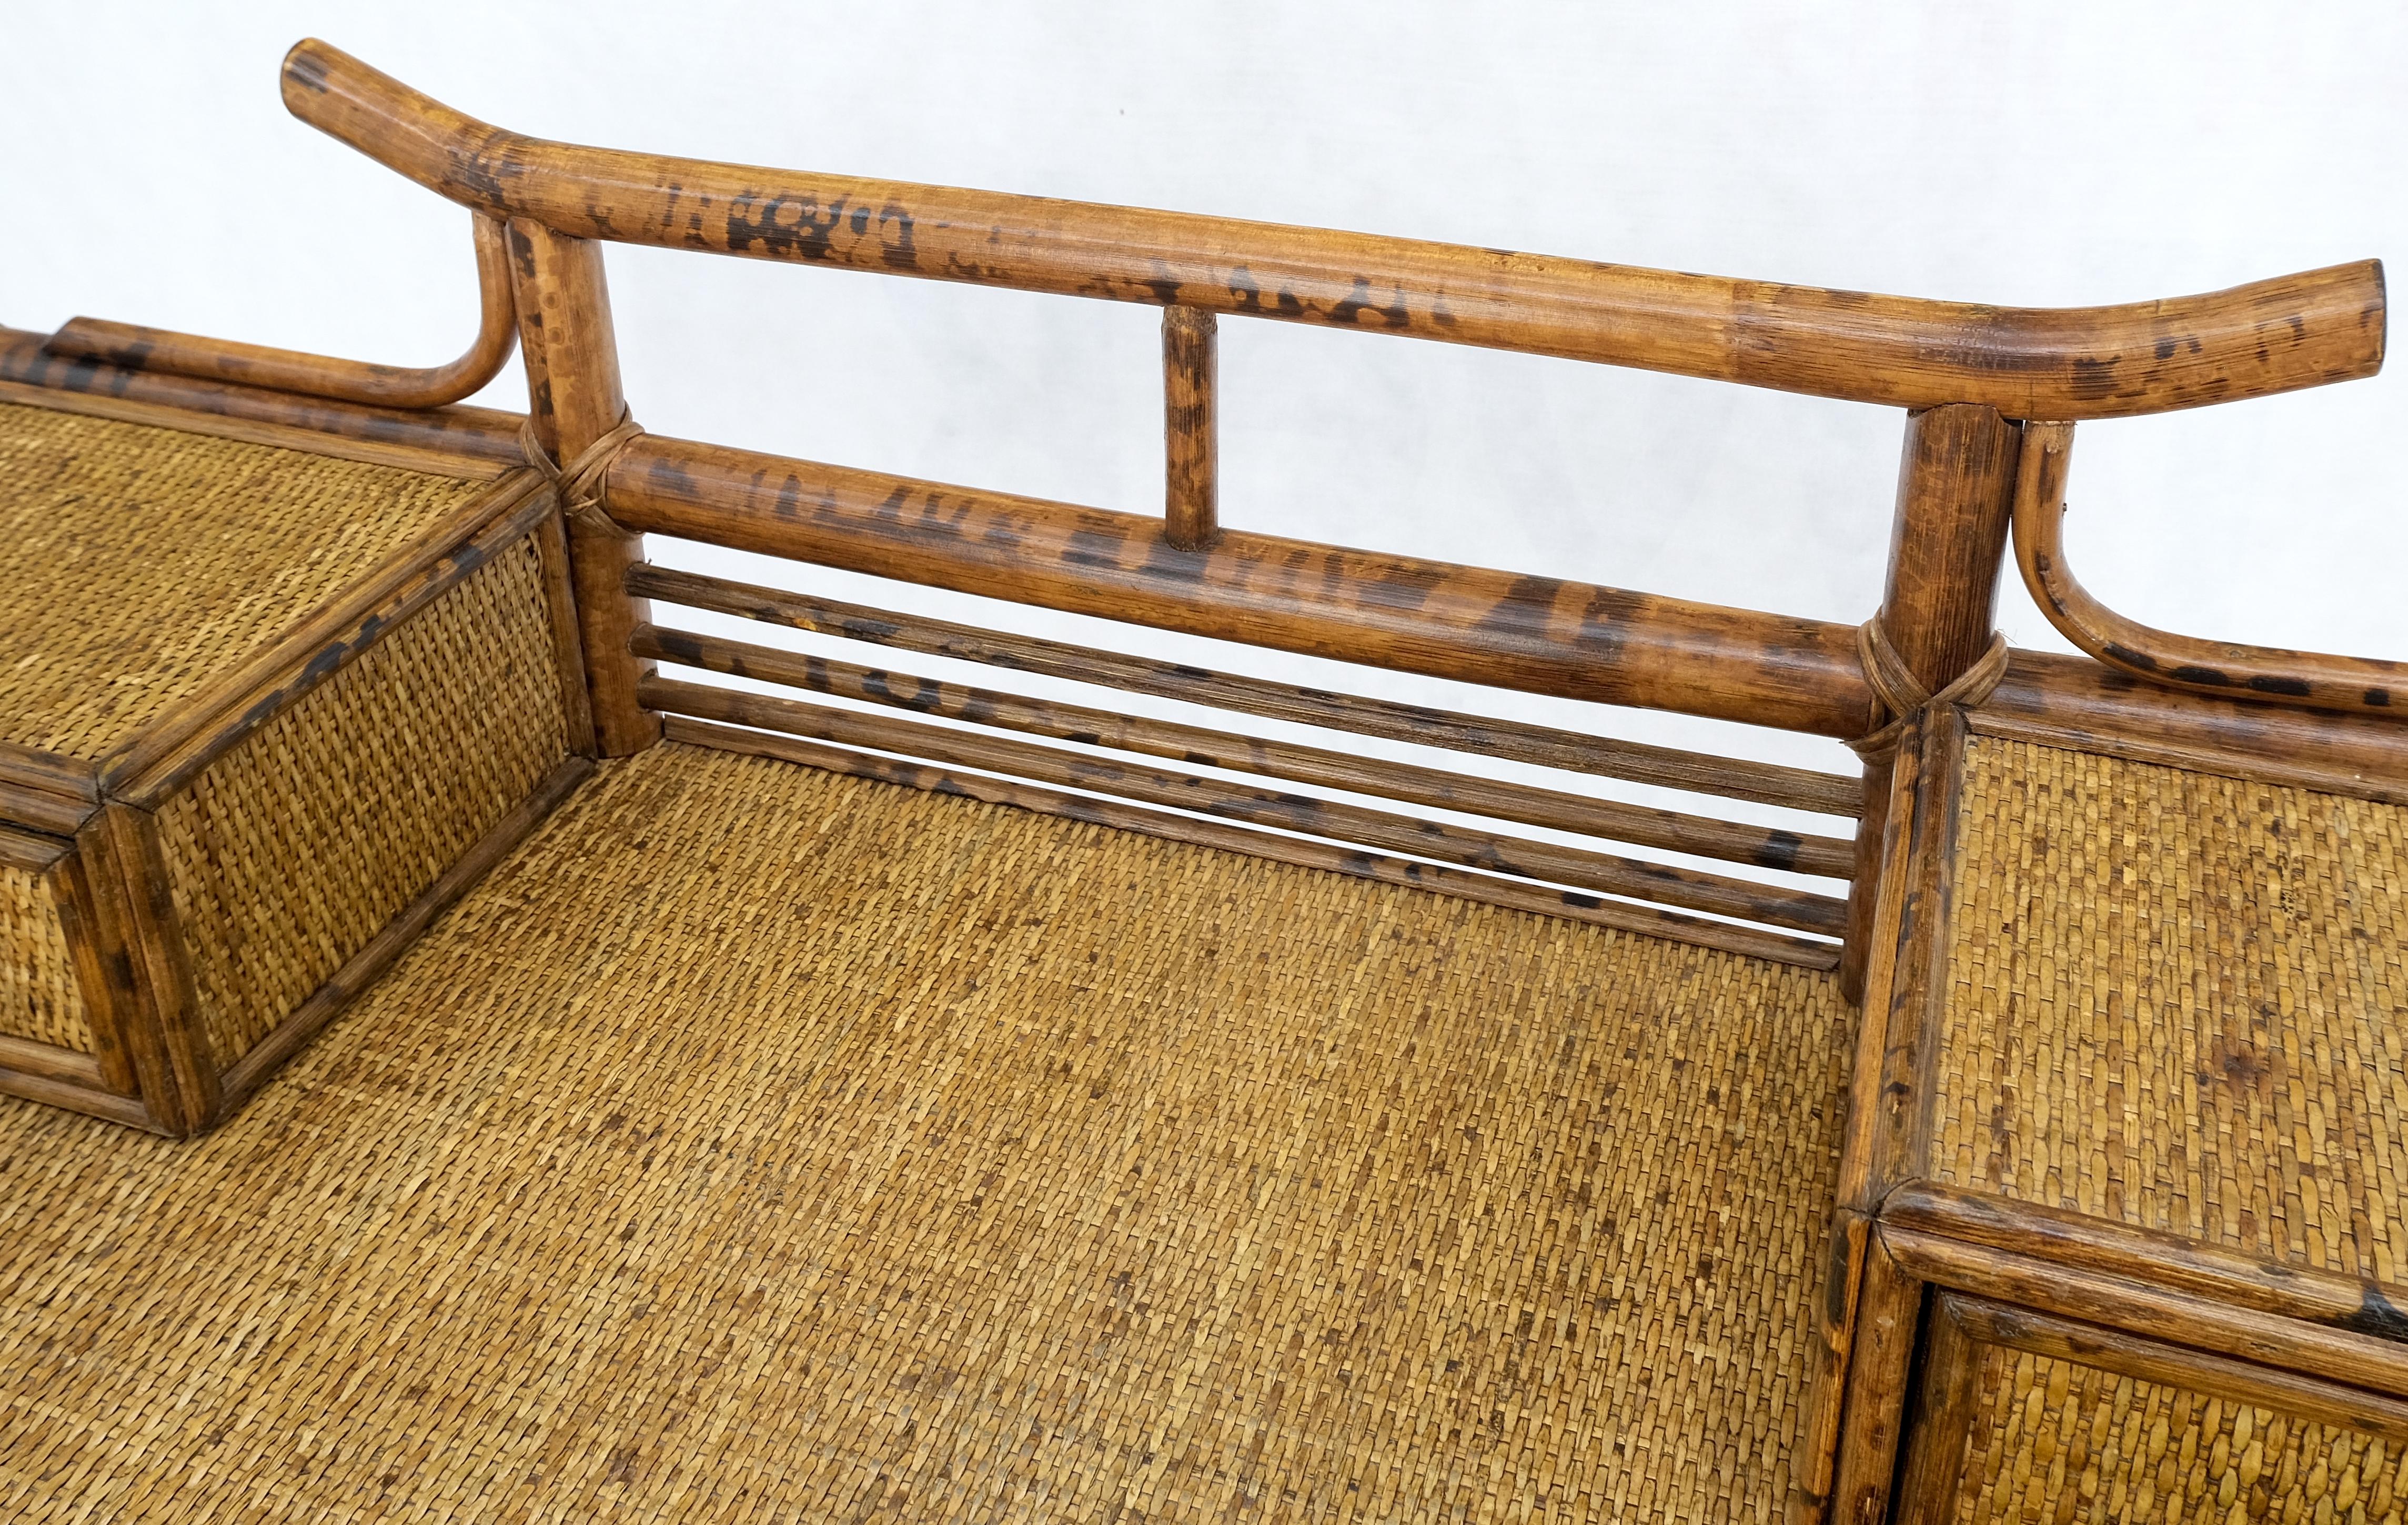 Asian Pagoda Style Burnt Bamboo Cane Desk & Chair MINT! In Good Condition For Sale In Rockaway, NJ